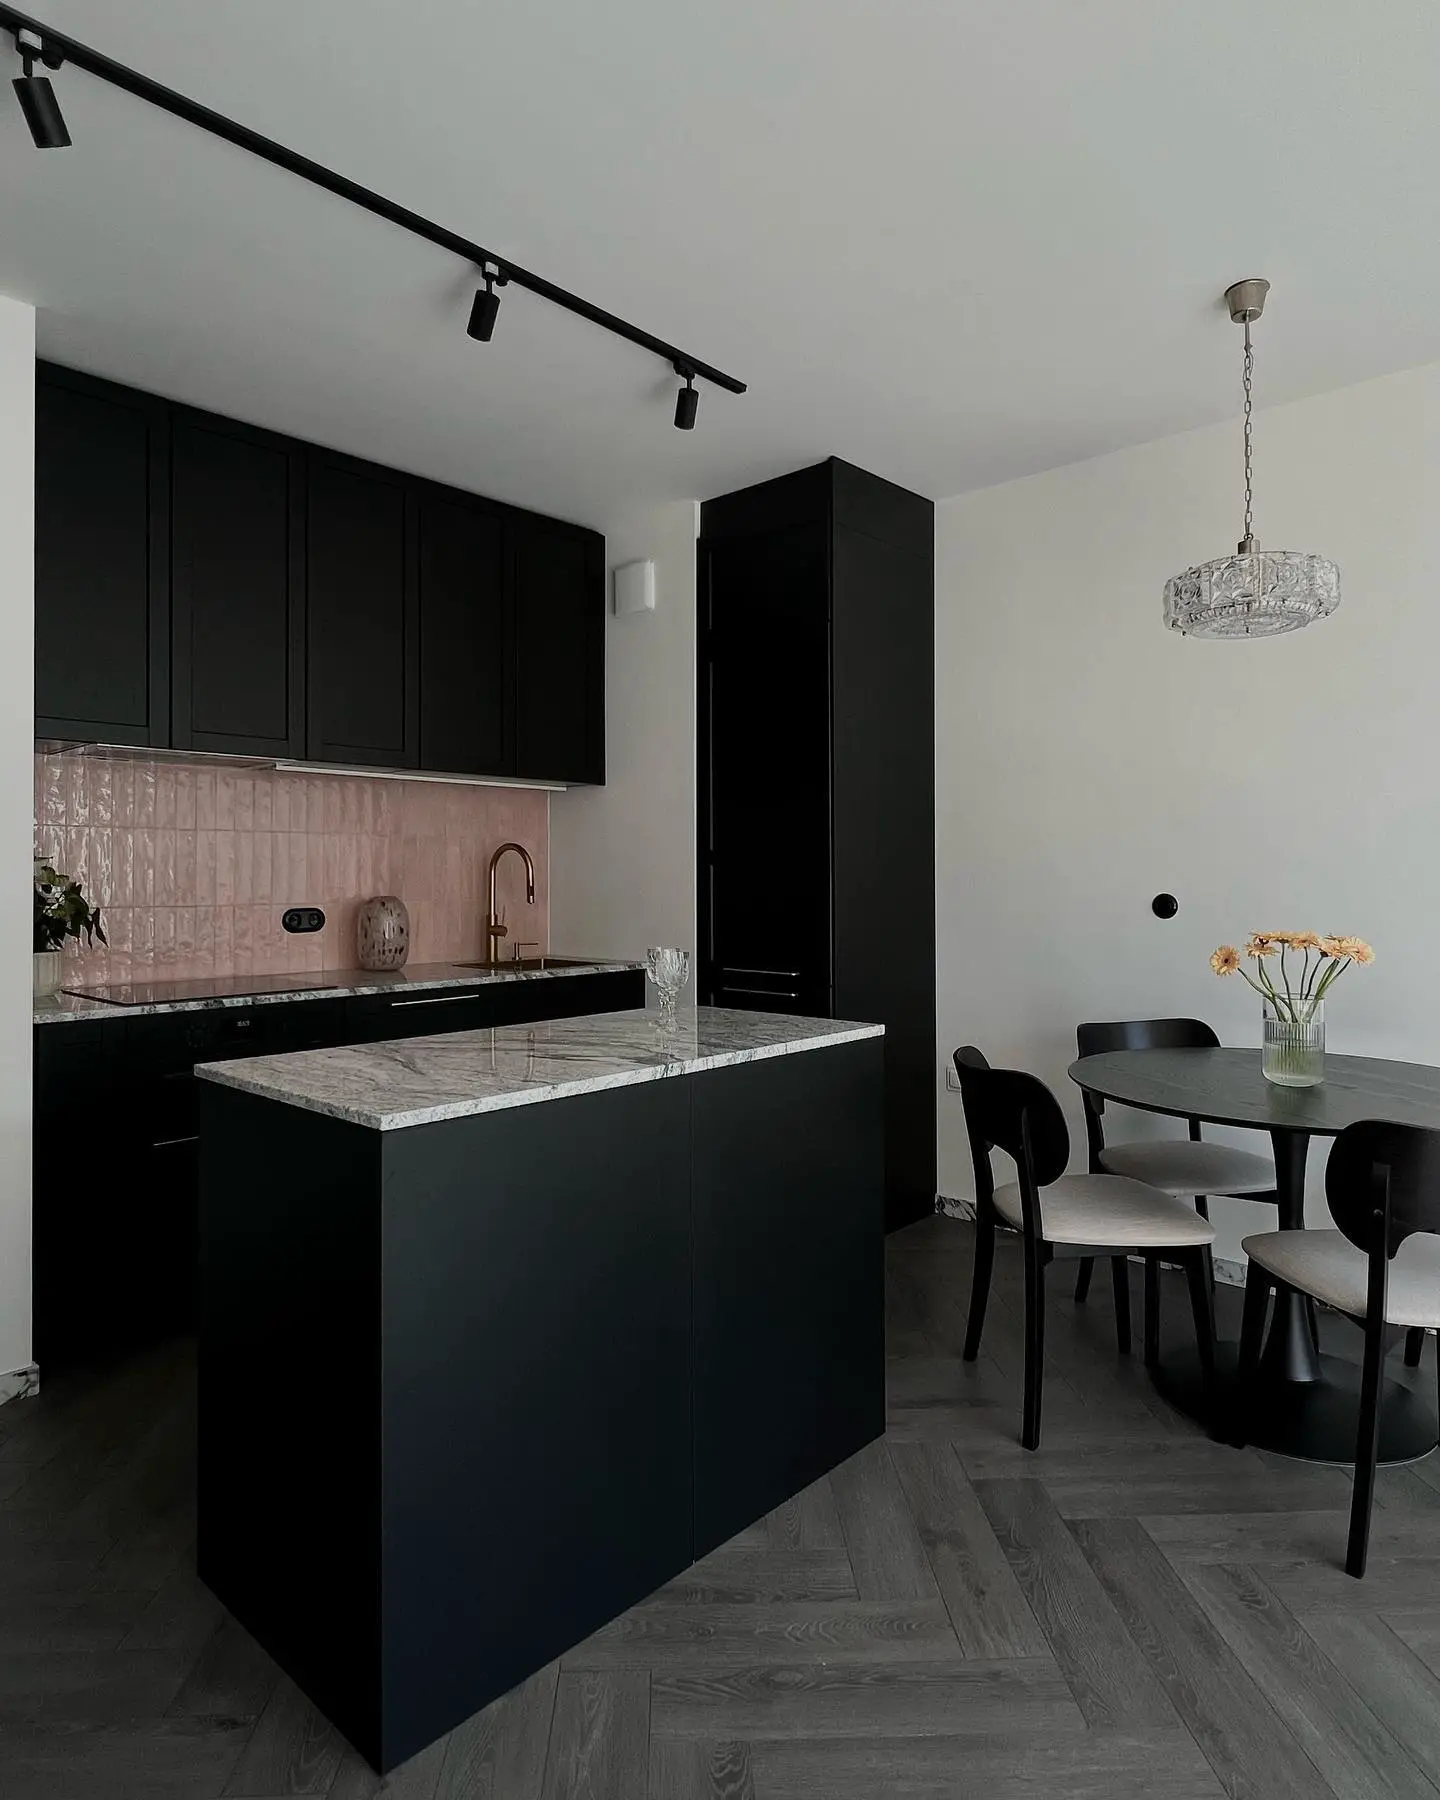 A kitchen with black cabinets and a dining table on a black kitchen floor.